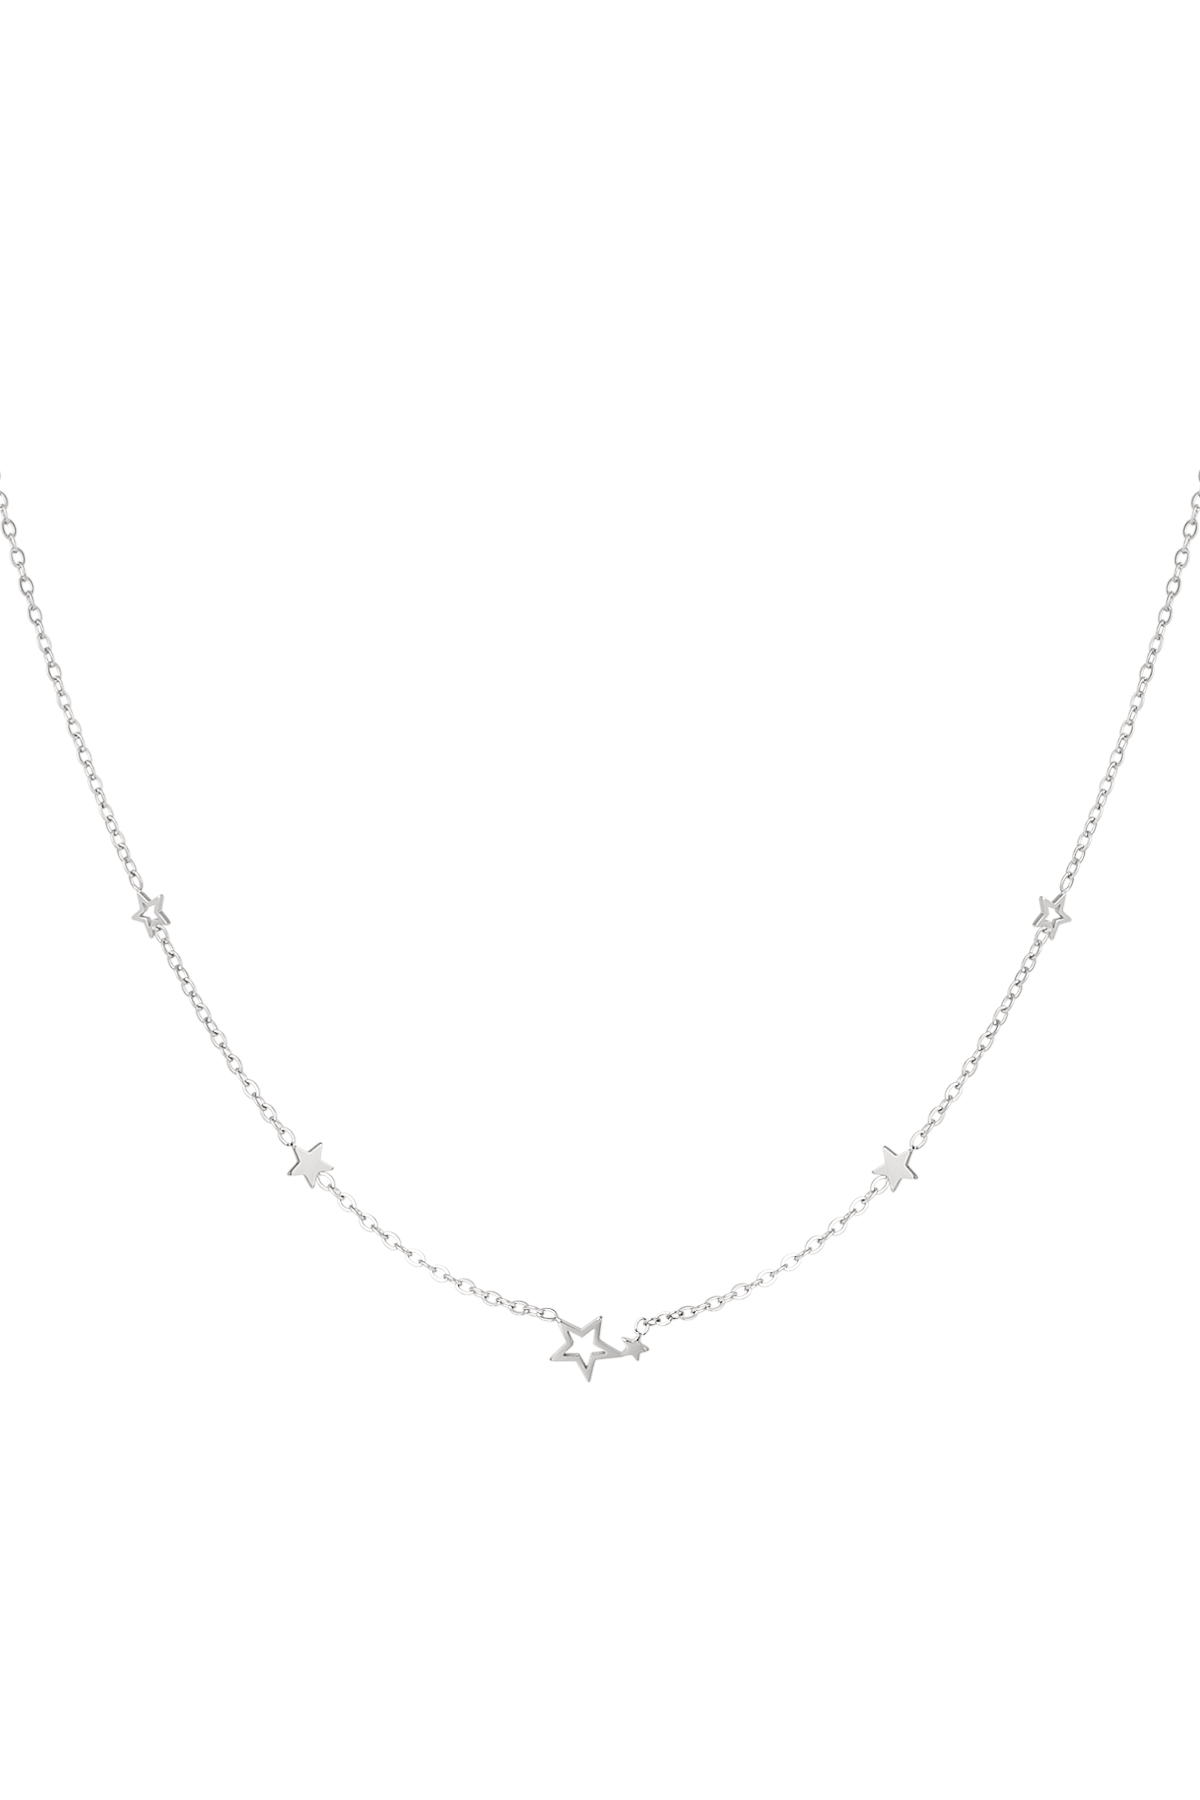 Necklace stainless steel stars - silver